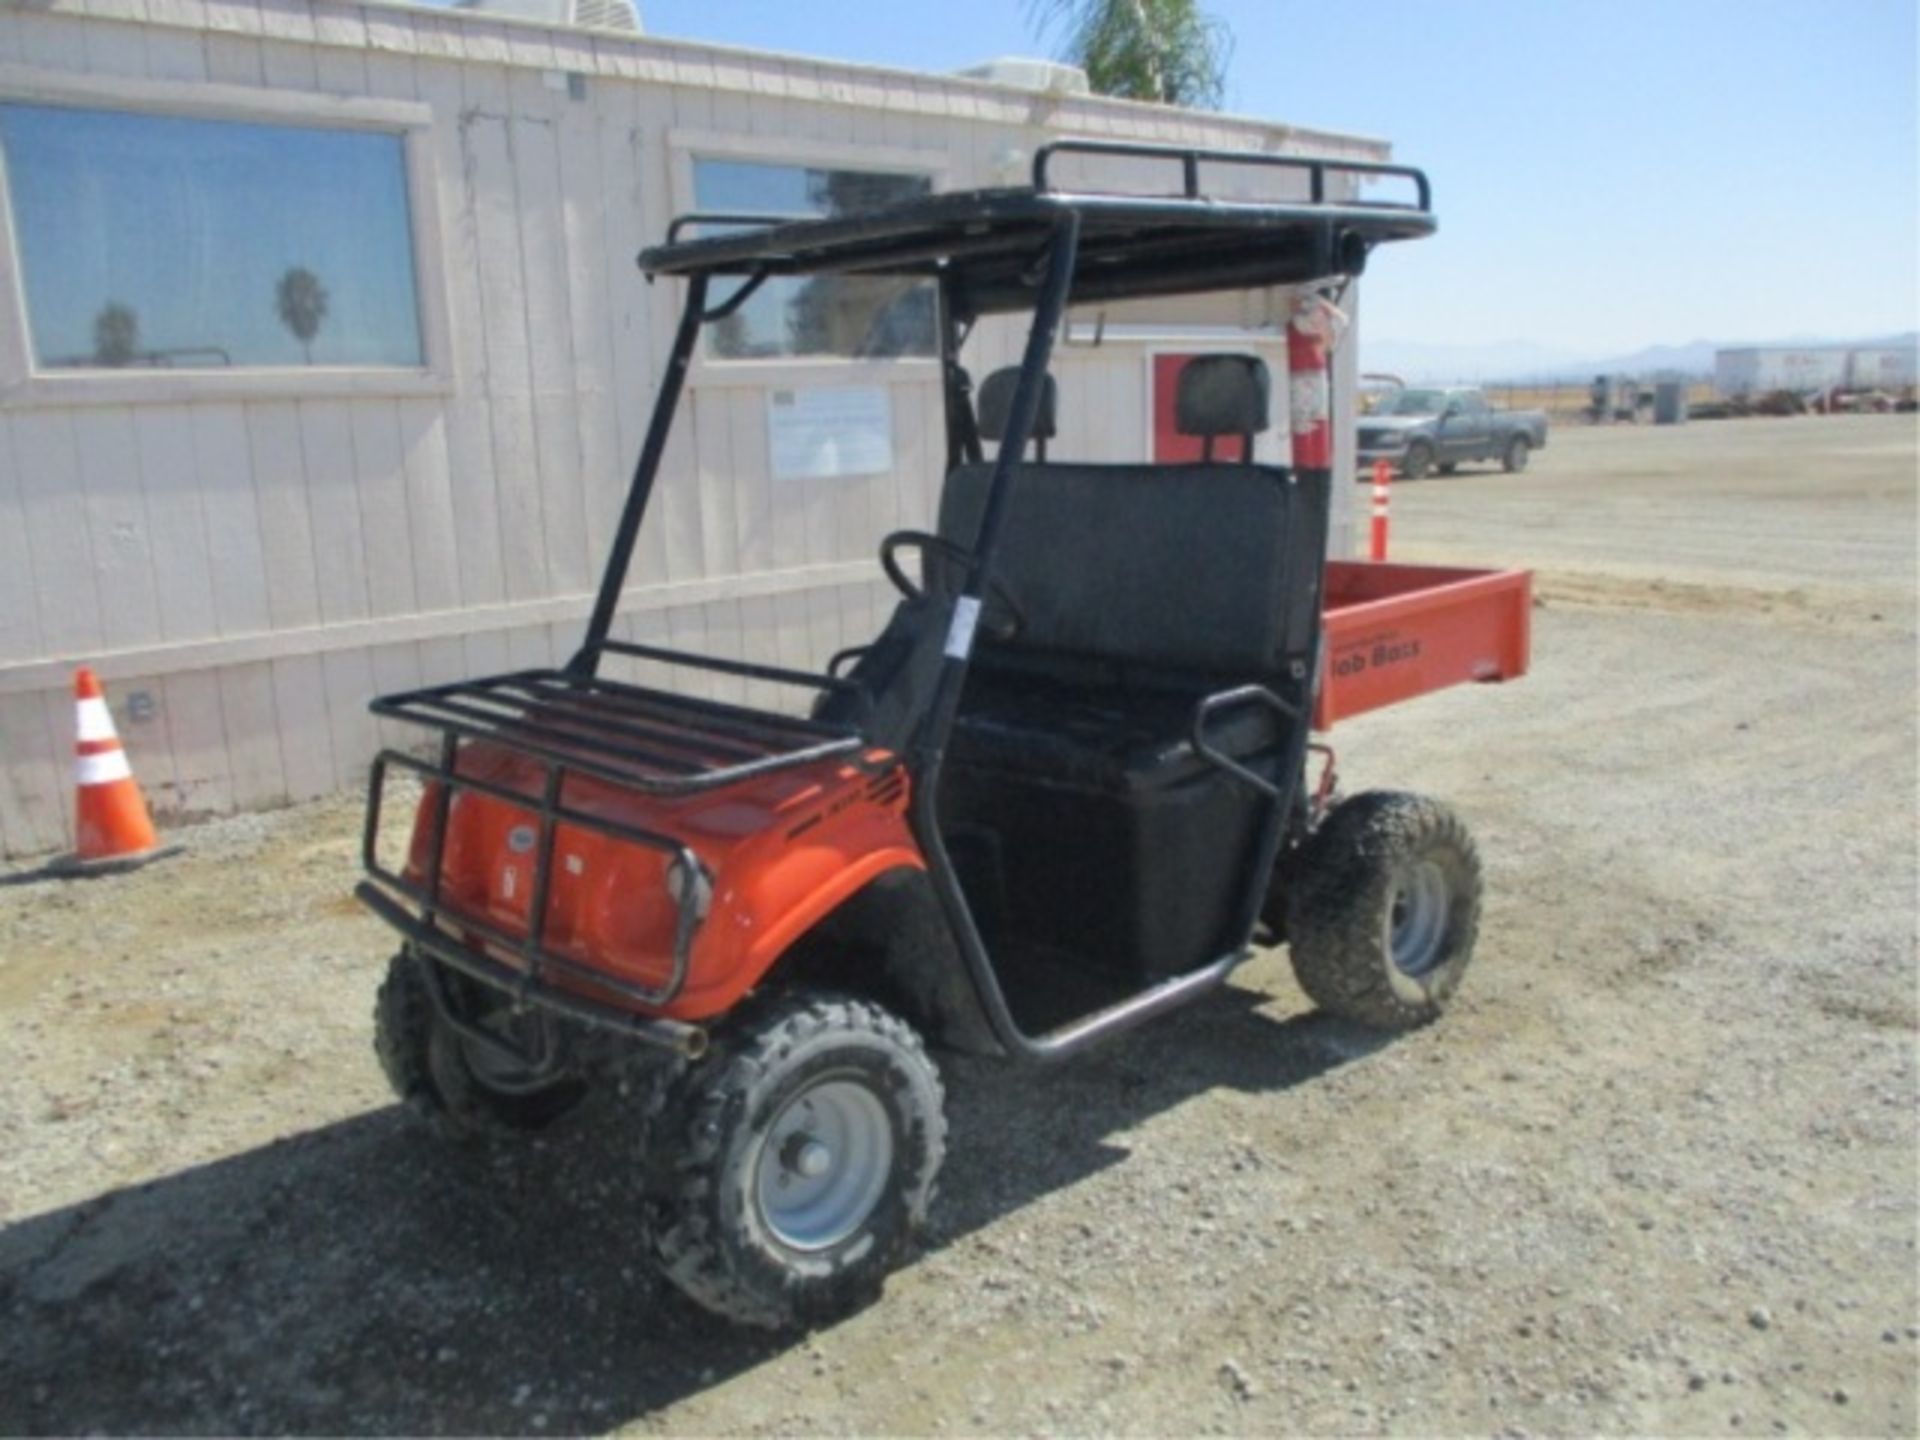 2008 American Sportworks Job Boss Utility Cart, Honda Gas, Rear Metal Dump Bed, Canopy, Tow Hitch, - Image 4 of 50